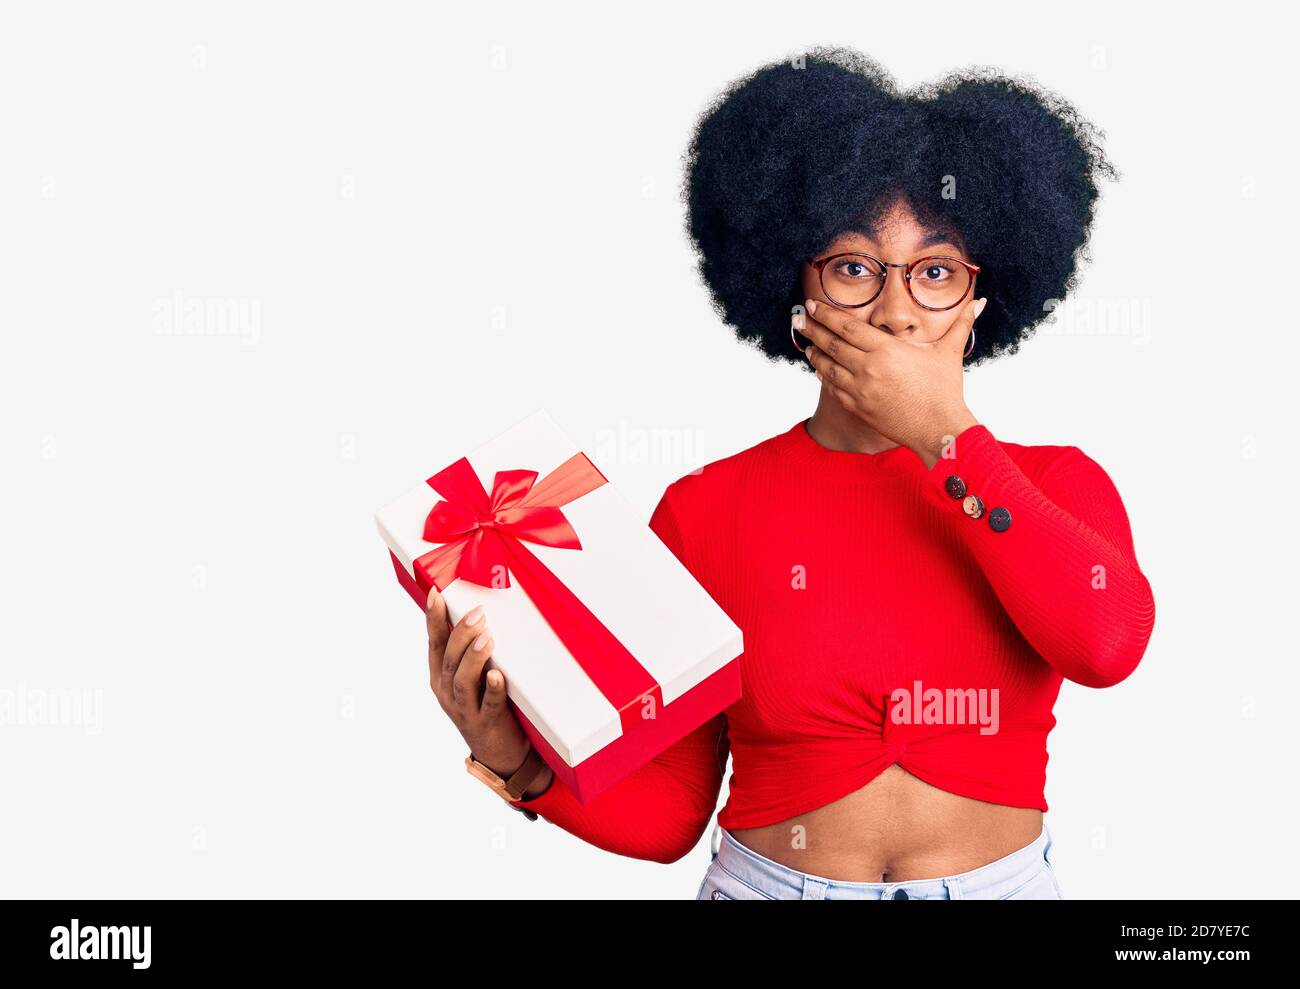 https://c8.alamy.com/comp/2D7YE7C/young-african-american-girl-holding-gift-shocked-covering-mouth-with-hands-for-mistake-secret-concept-2D7YE7C.jpg